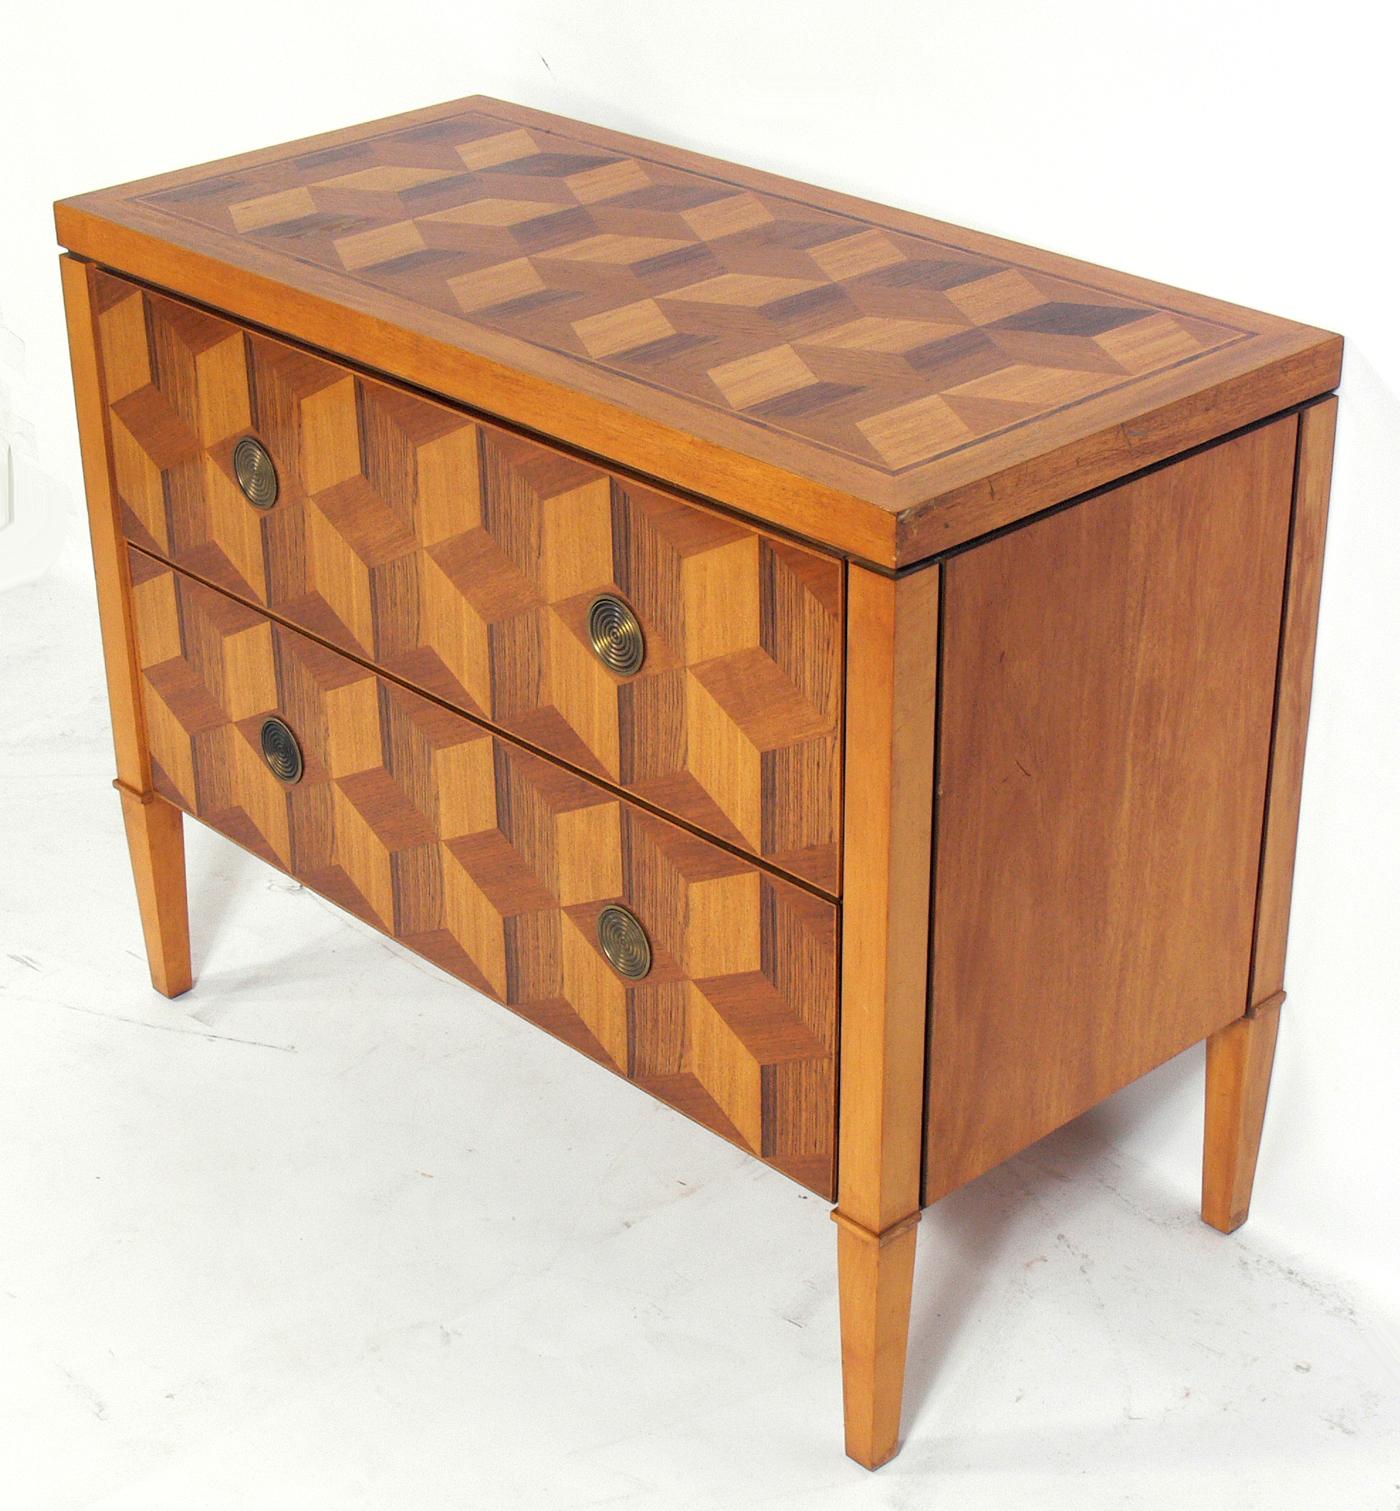 Geometric marquetry chest by Baker, American, circa 1990s. This piece has outstanding geometric marquetry that looks different from every angle. It is a versatile size and can be used as a media cabinet or credenza in a living area, or as a chest or